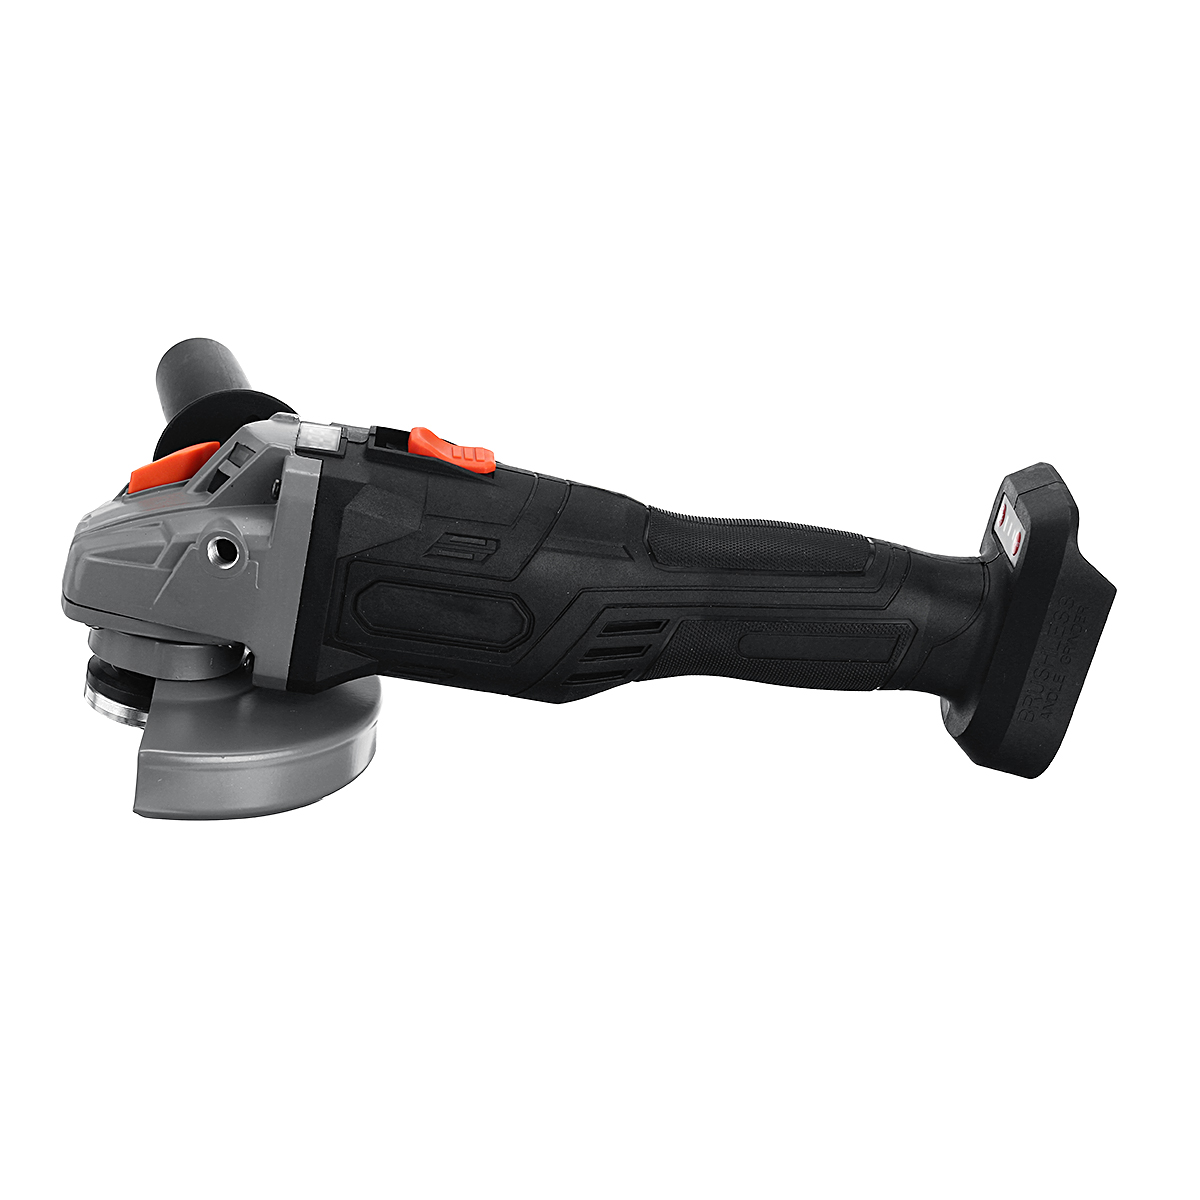 800W-125mm-Display-Cordless-Brushless-Angle-Grinder-Electric-Angle-Grinding-Cutting-Machine-For-18V--1688998-6